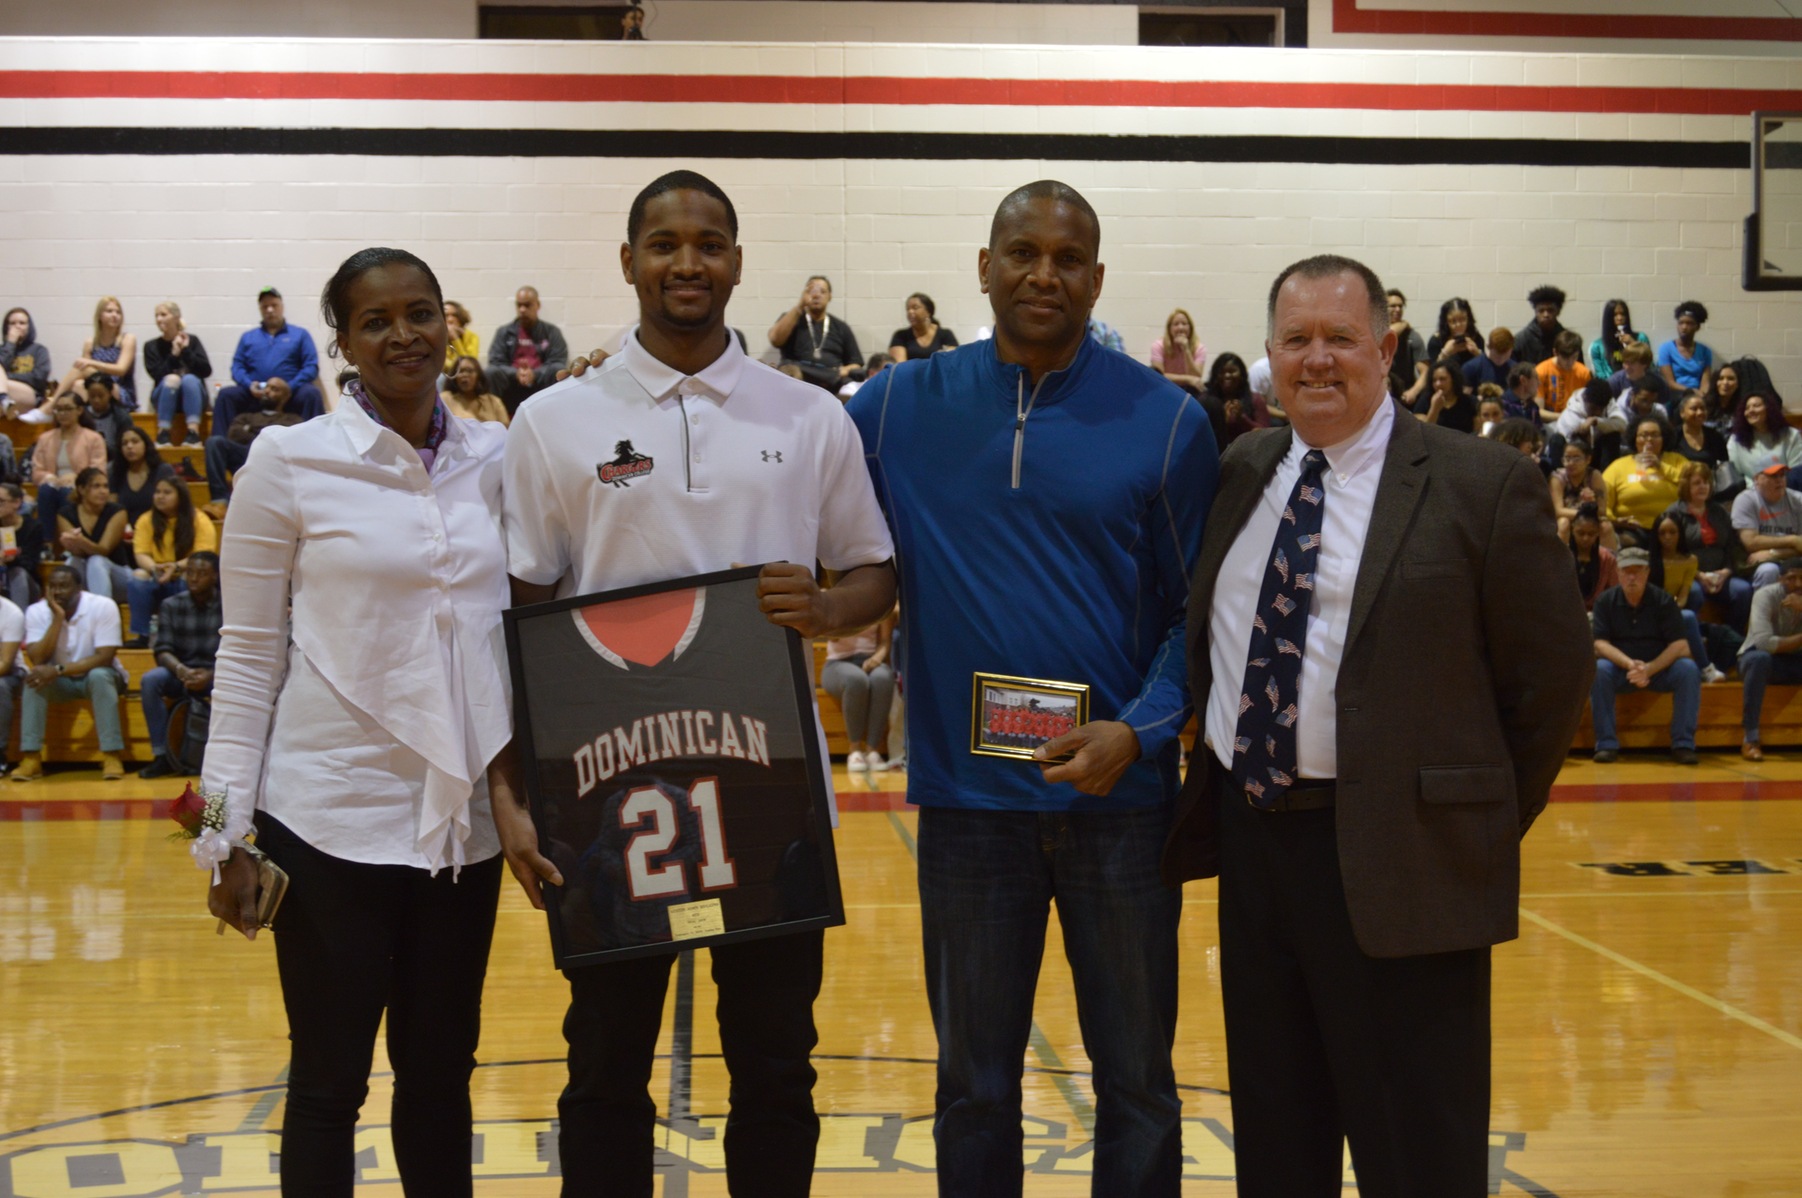 CONCORDIA CLIPS CHARGERS ON SENIOR NIGHT